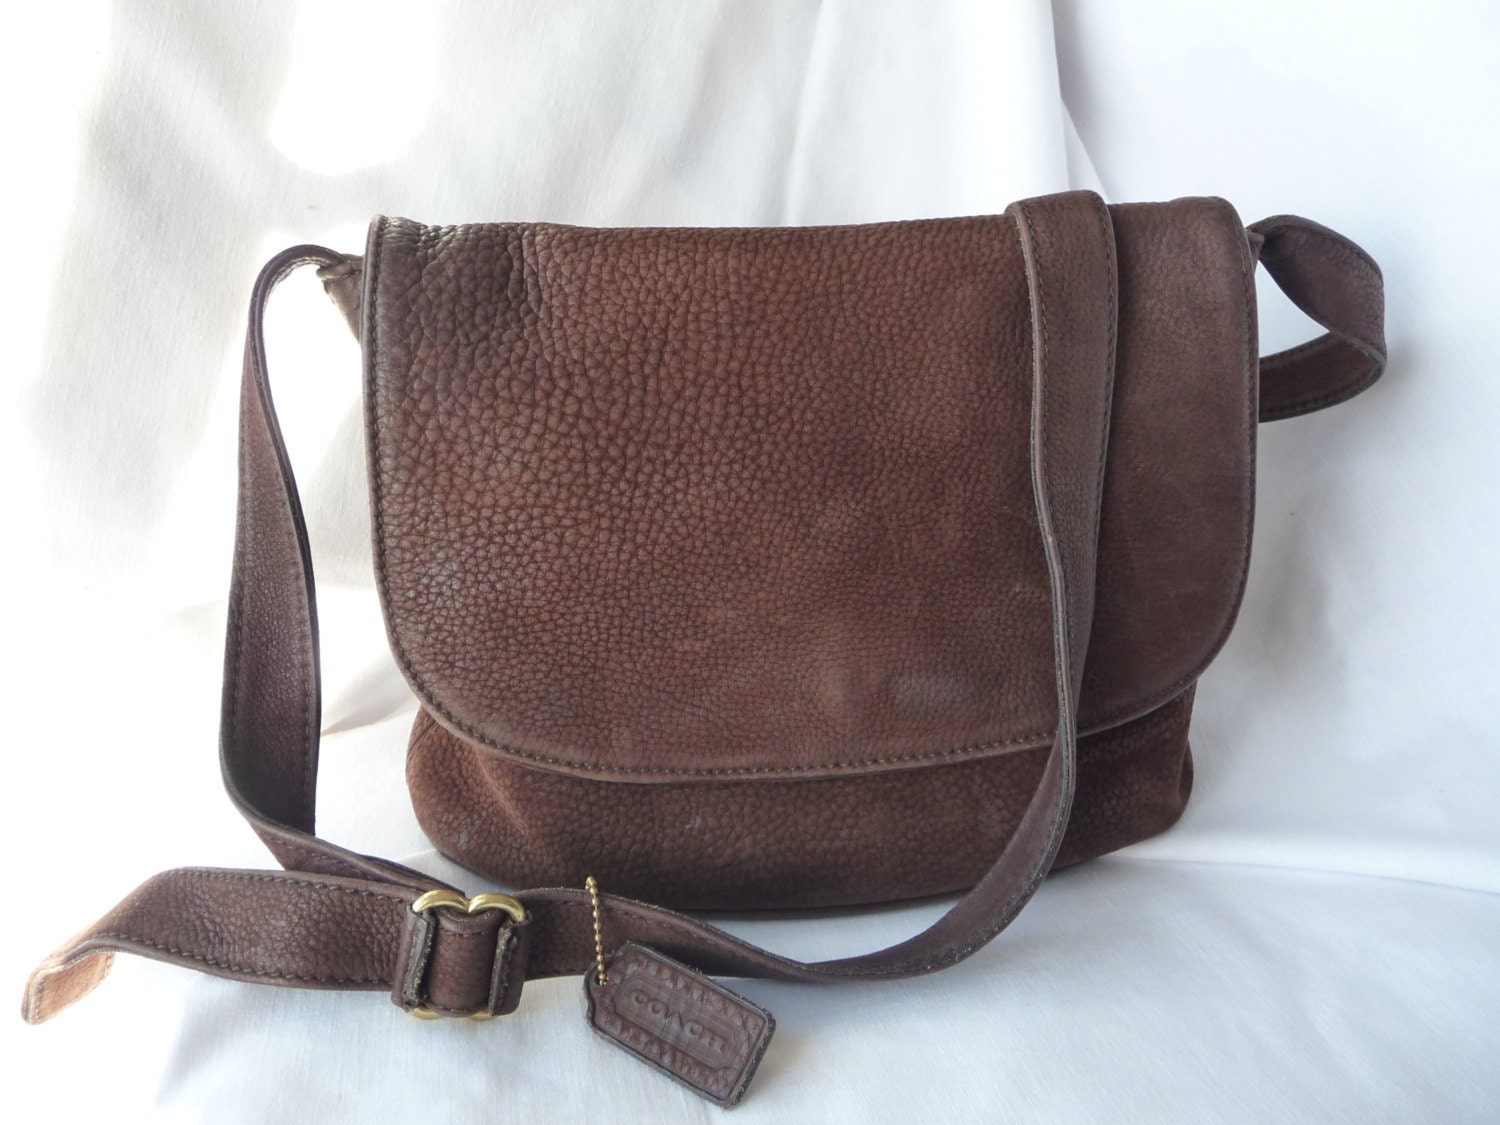 Vintage COACH Large Bucket Messenger Bag in by SavedbytheSaver